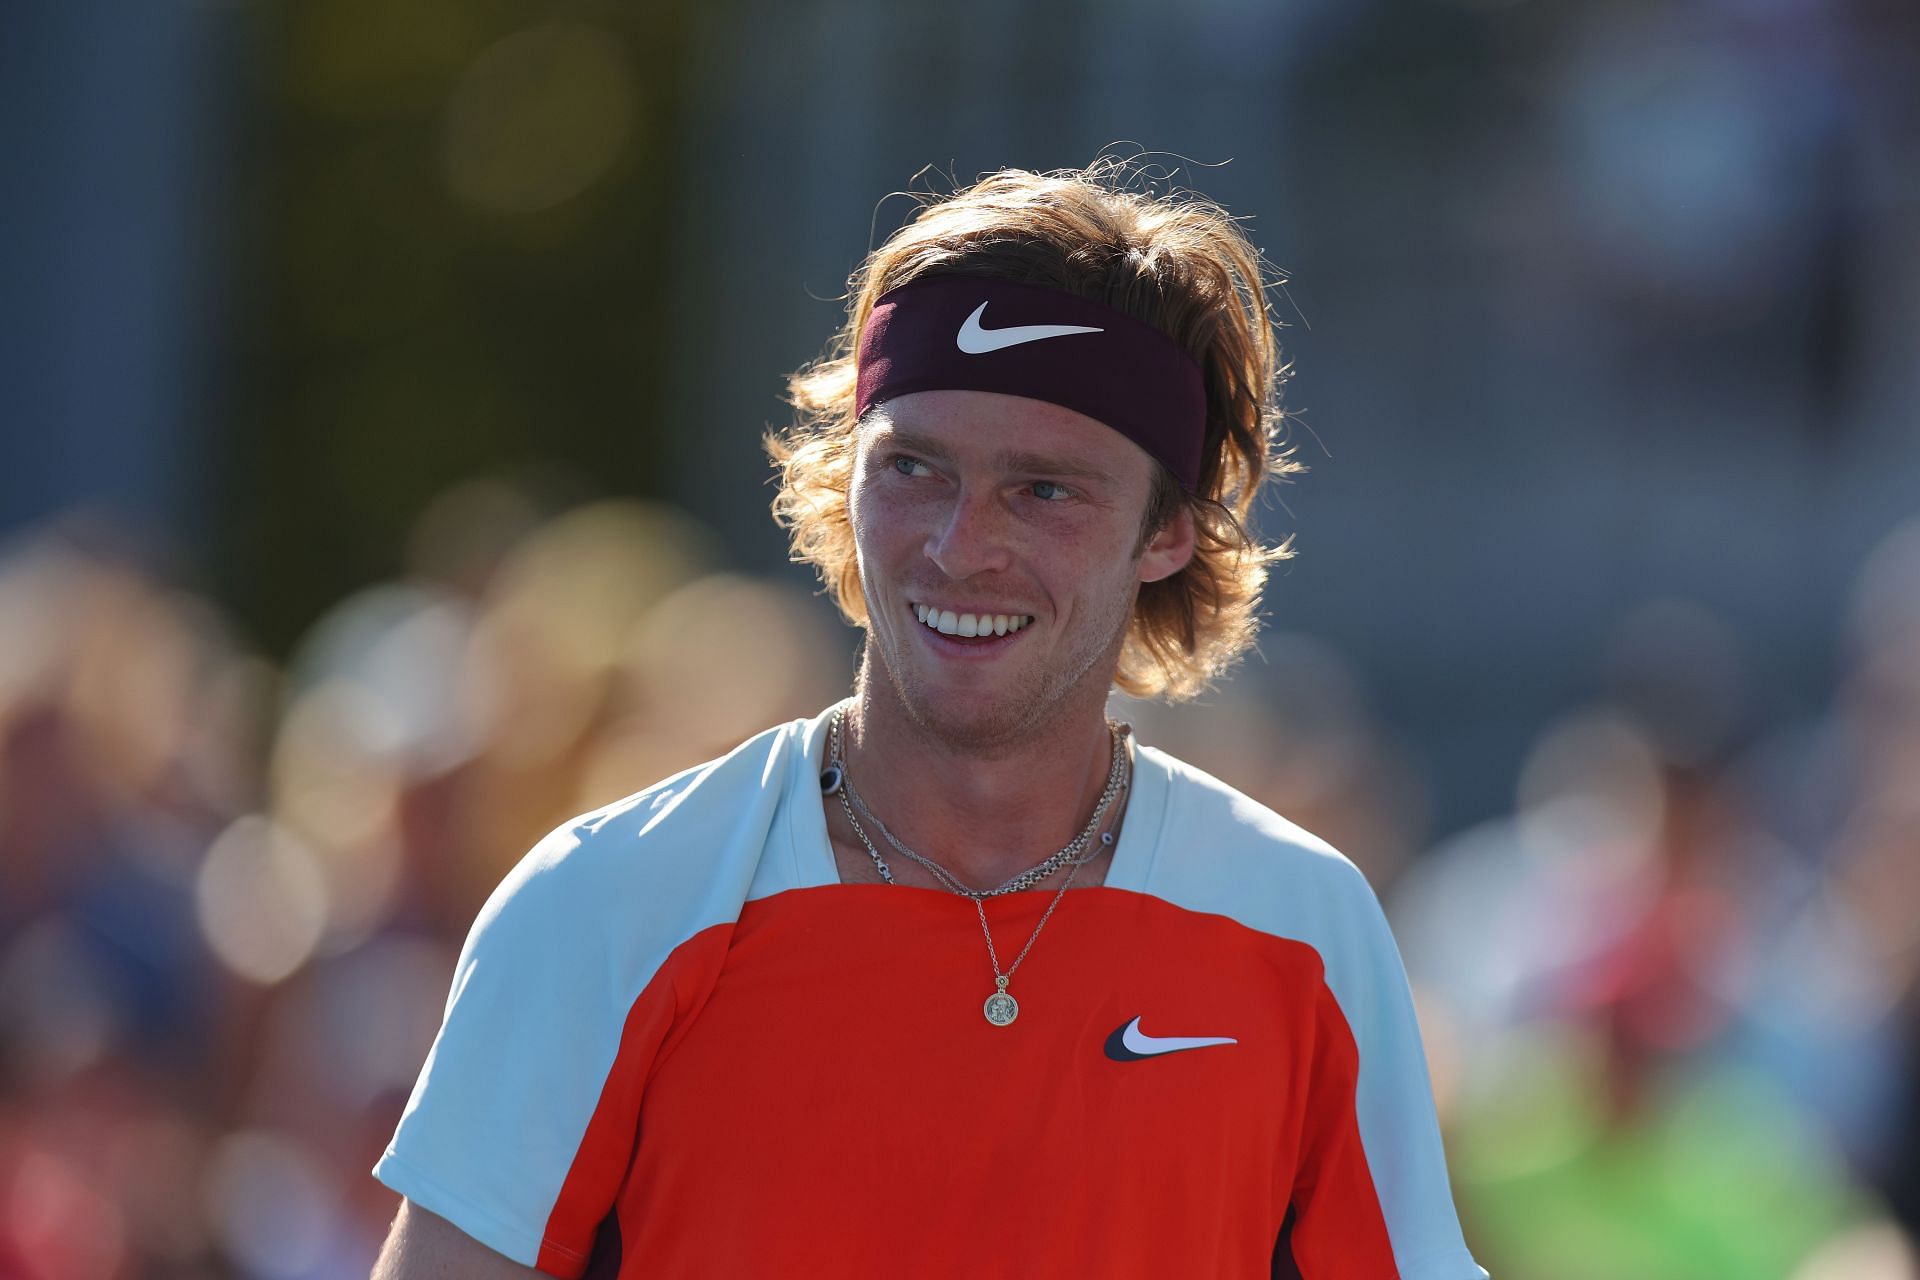 Andrey Rublev at the 2022 U.S. Open.